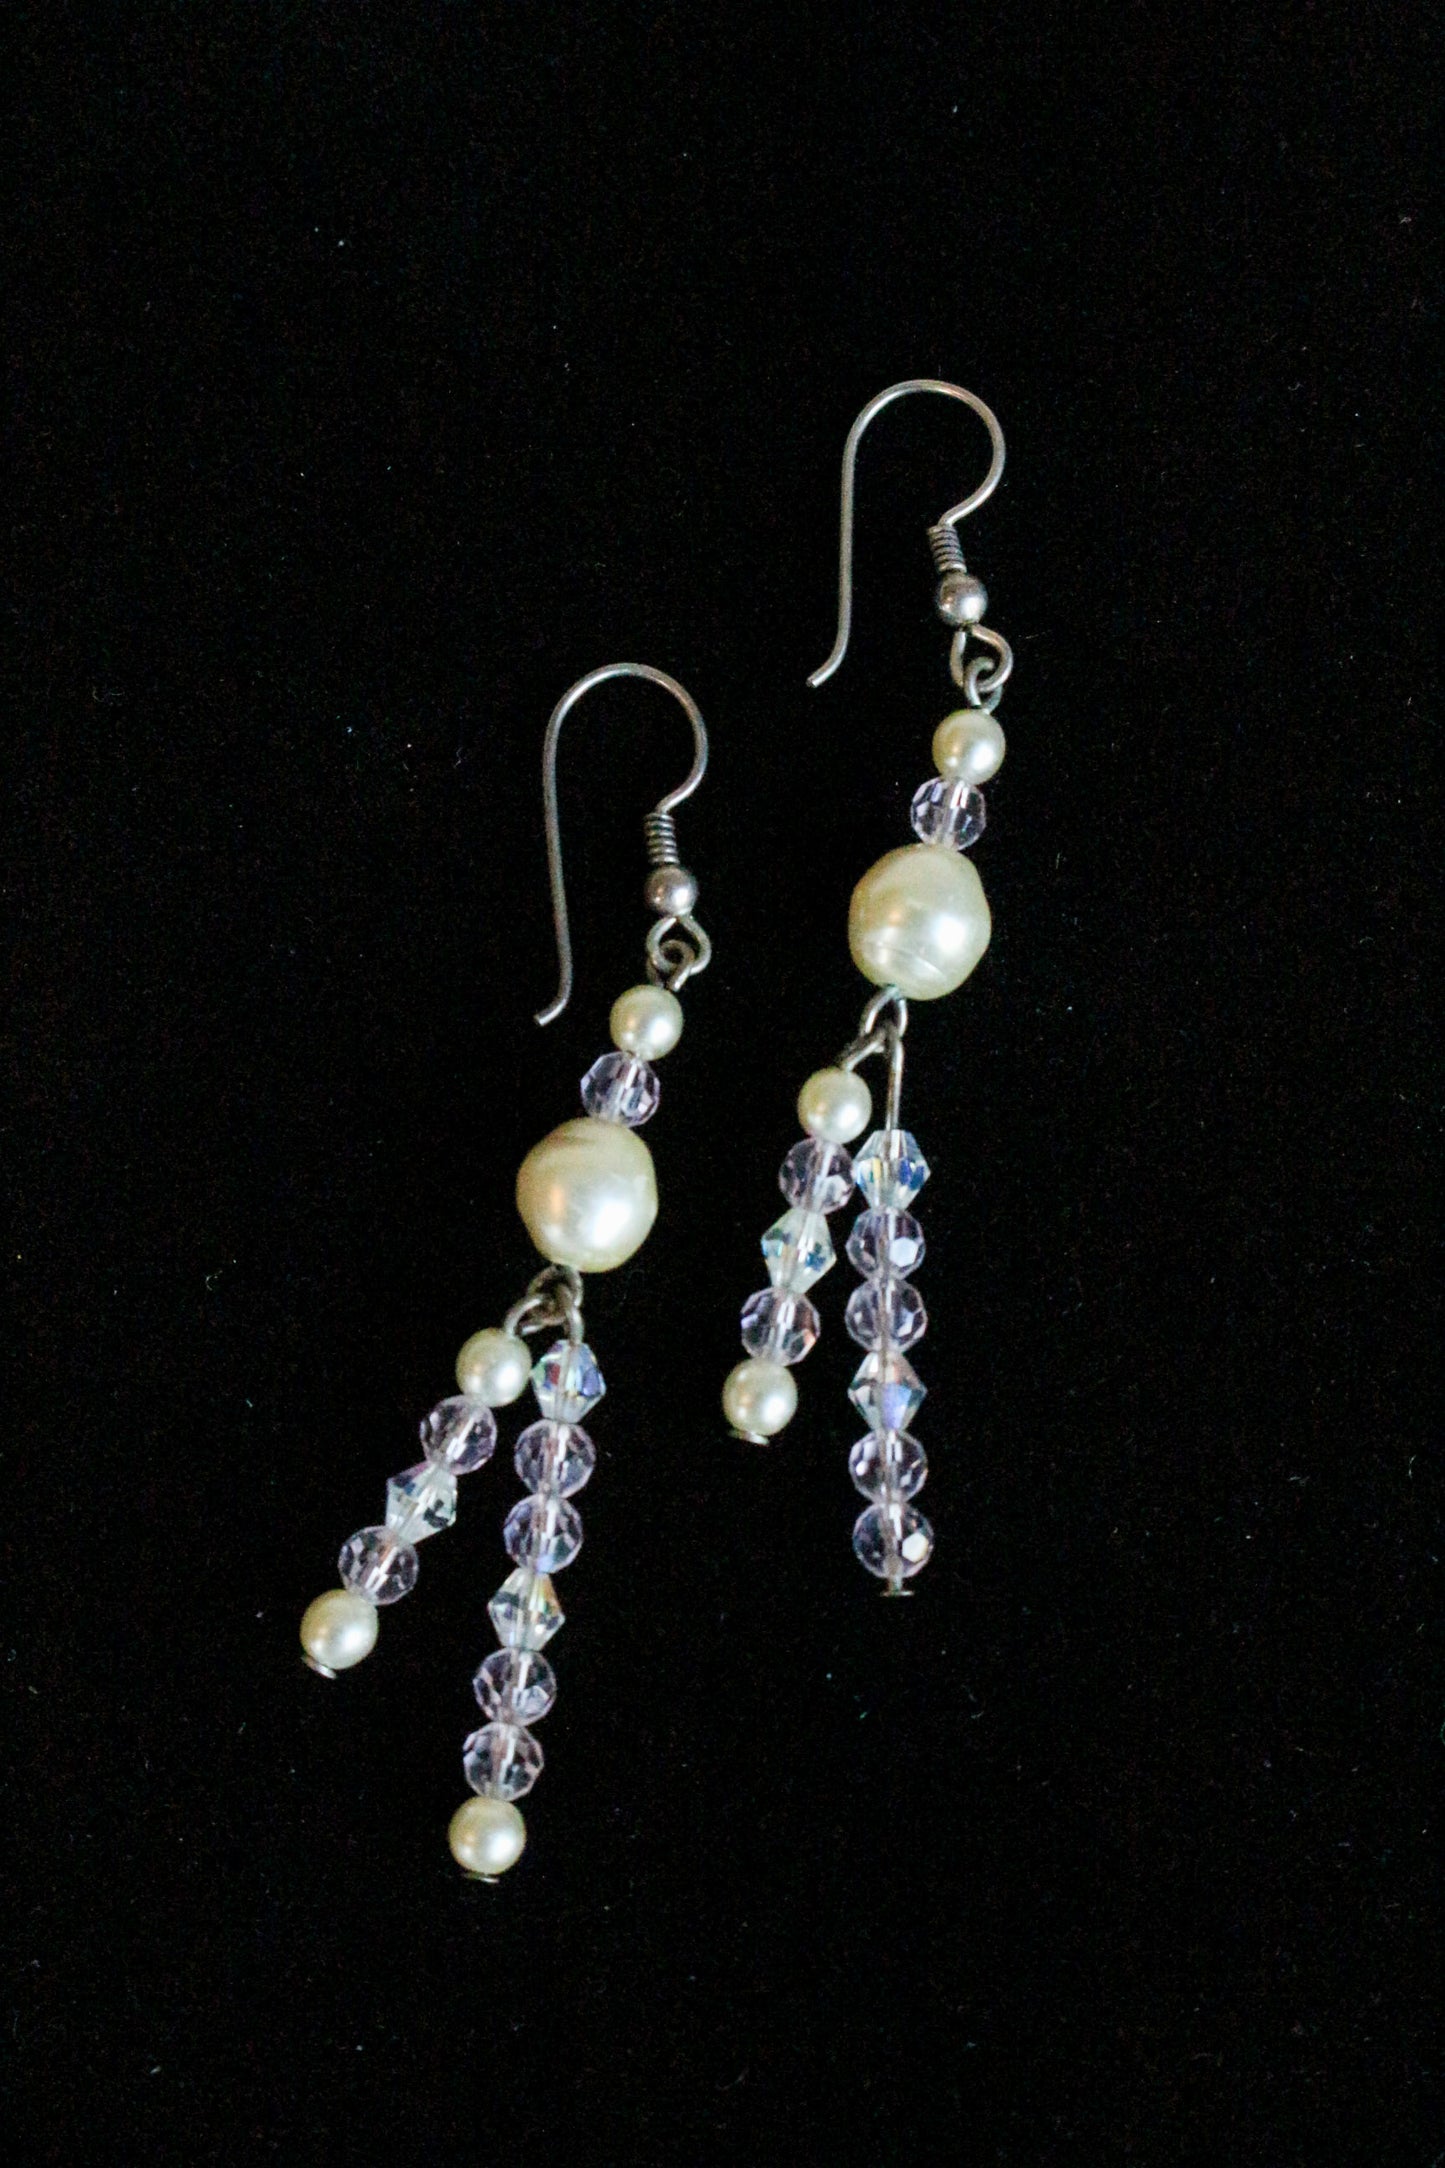 Sparkly dangly earrings